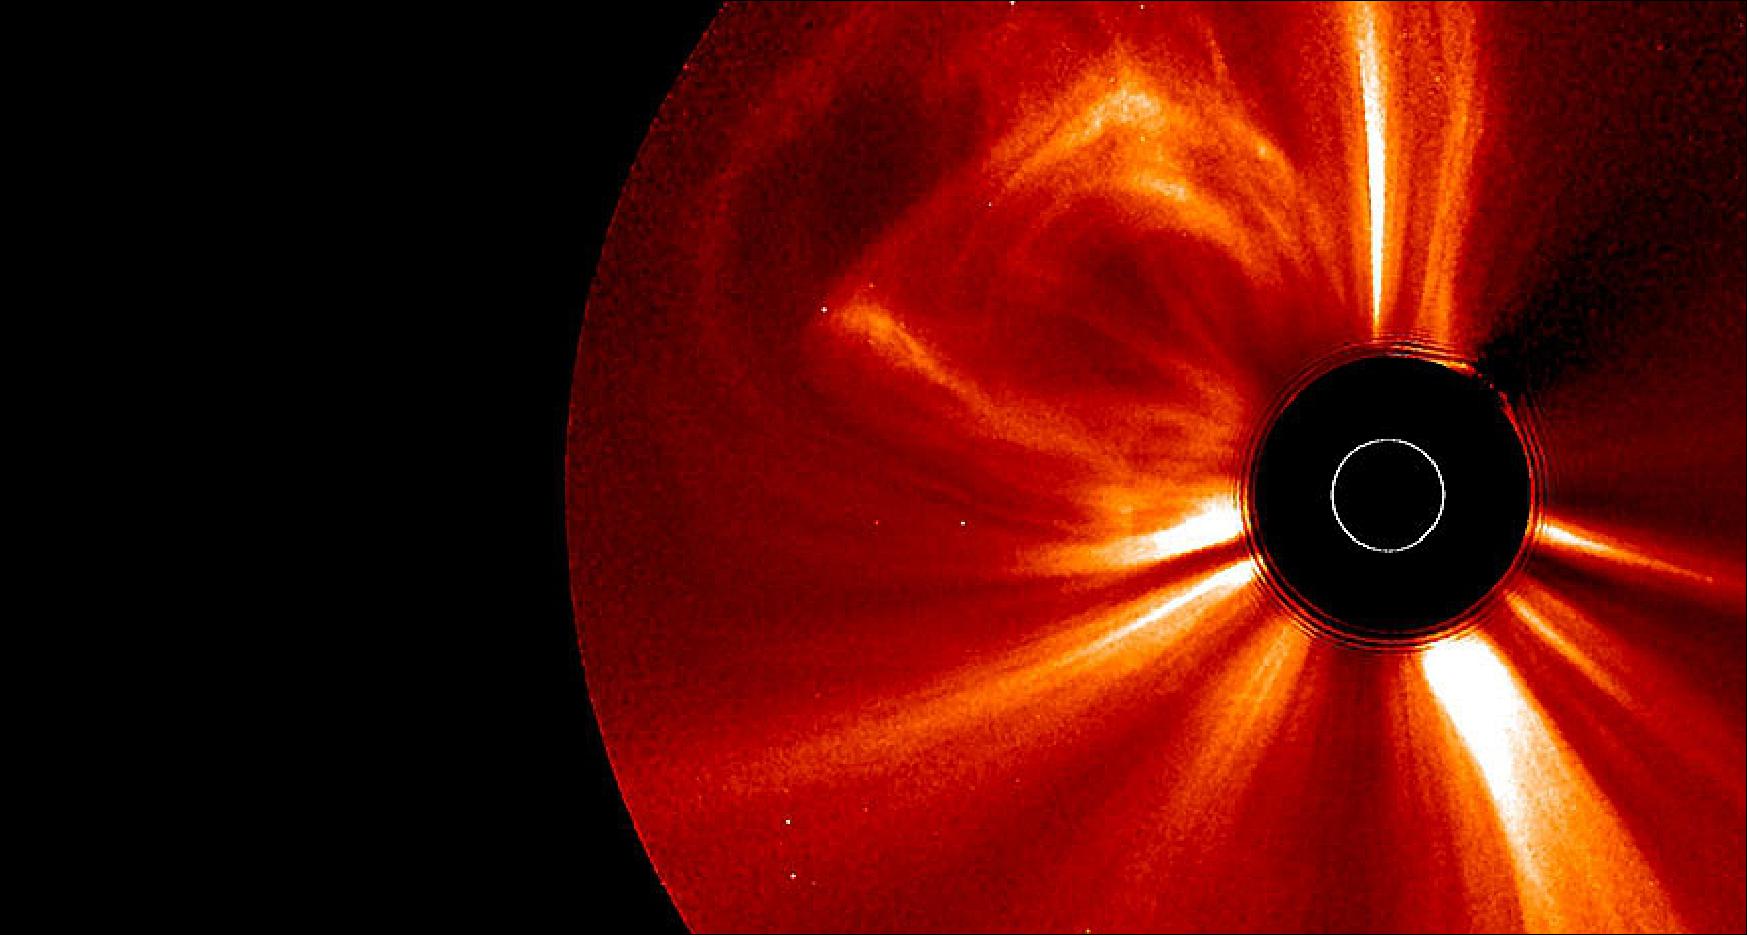 Figure 25: A calm facade: The outer corona of the sun appears smooth and calm. But freshly analyzed images from NASA’s STEREO spacecraft, which blocks out the sun (center) to bring the corona into view, shows unexpected texture (image credit: SwRI, NASA)